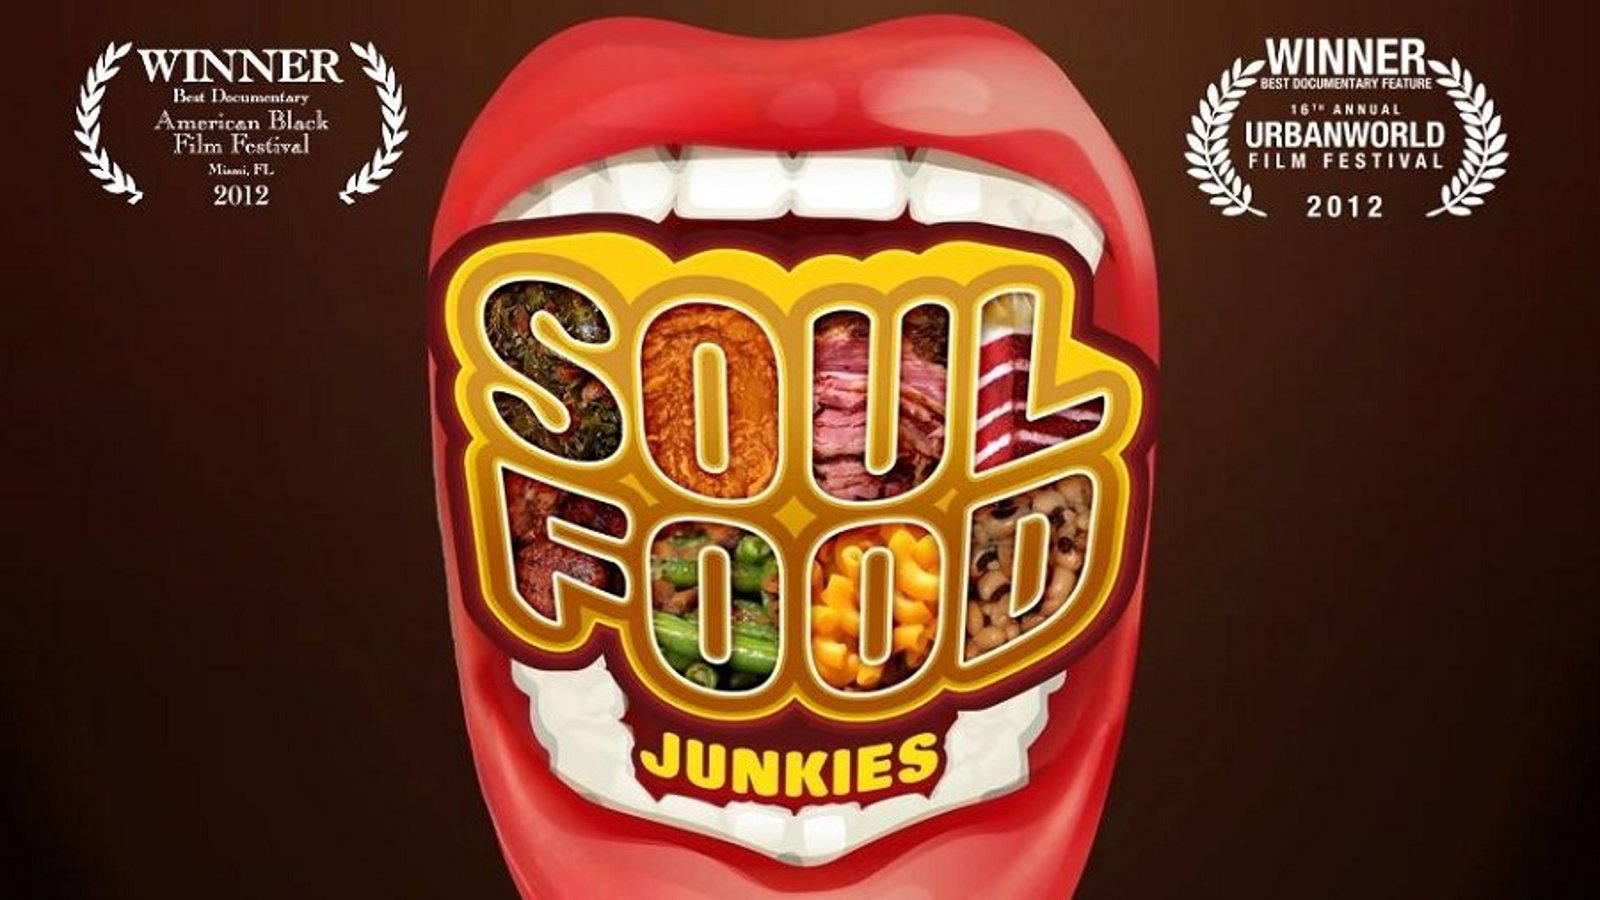 Soul Food Junkies - A Film About Family, Food & Tradition